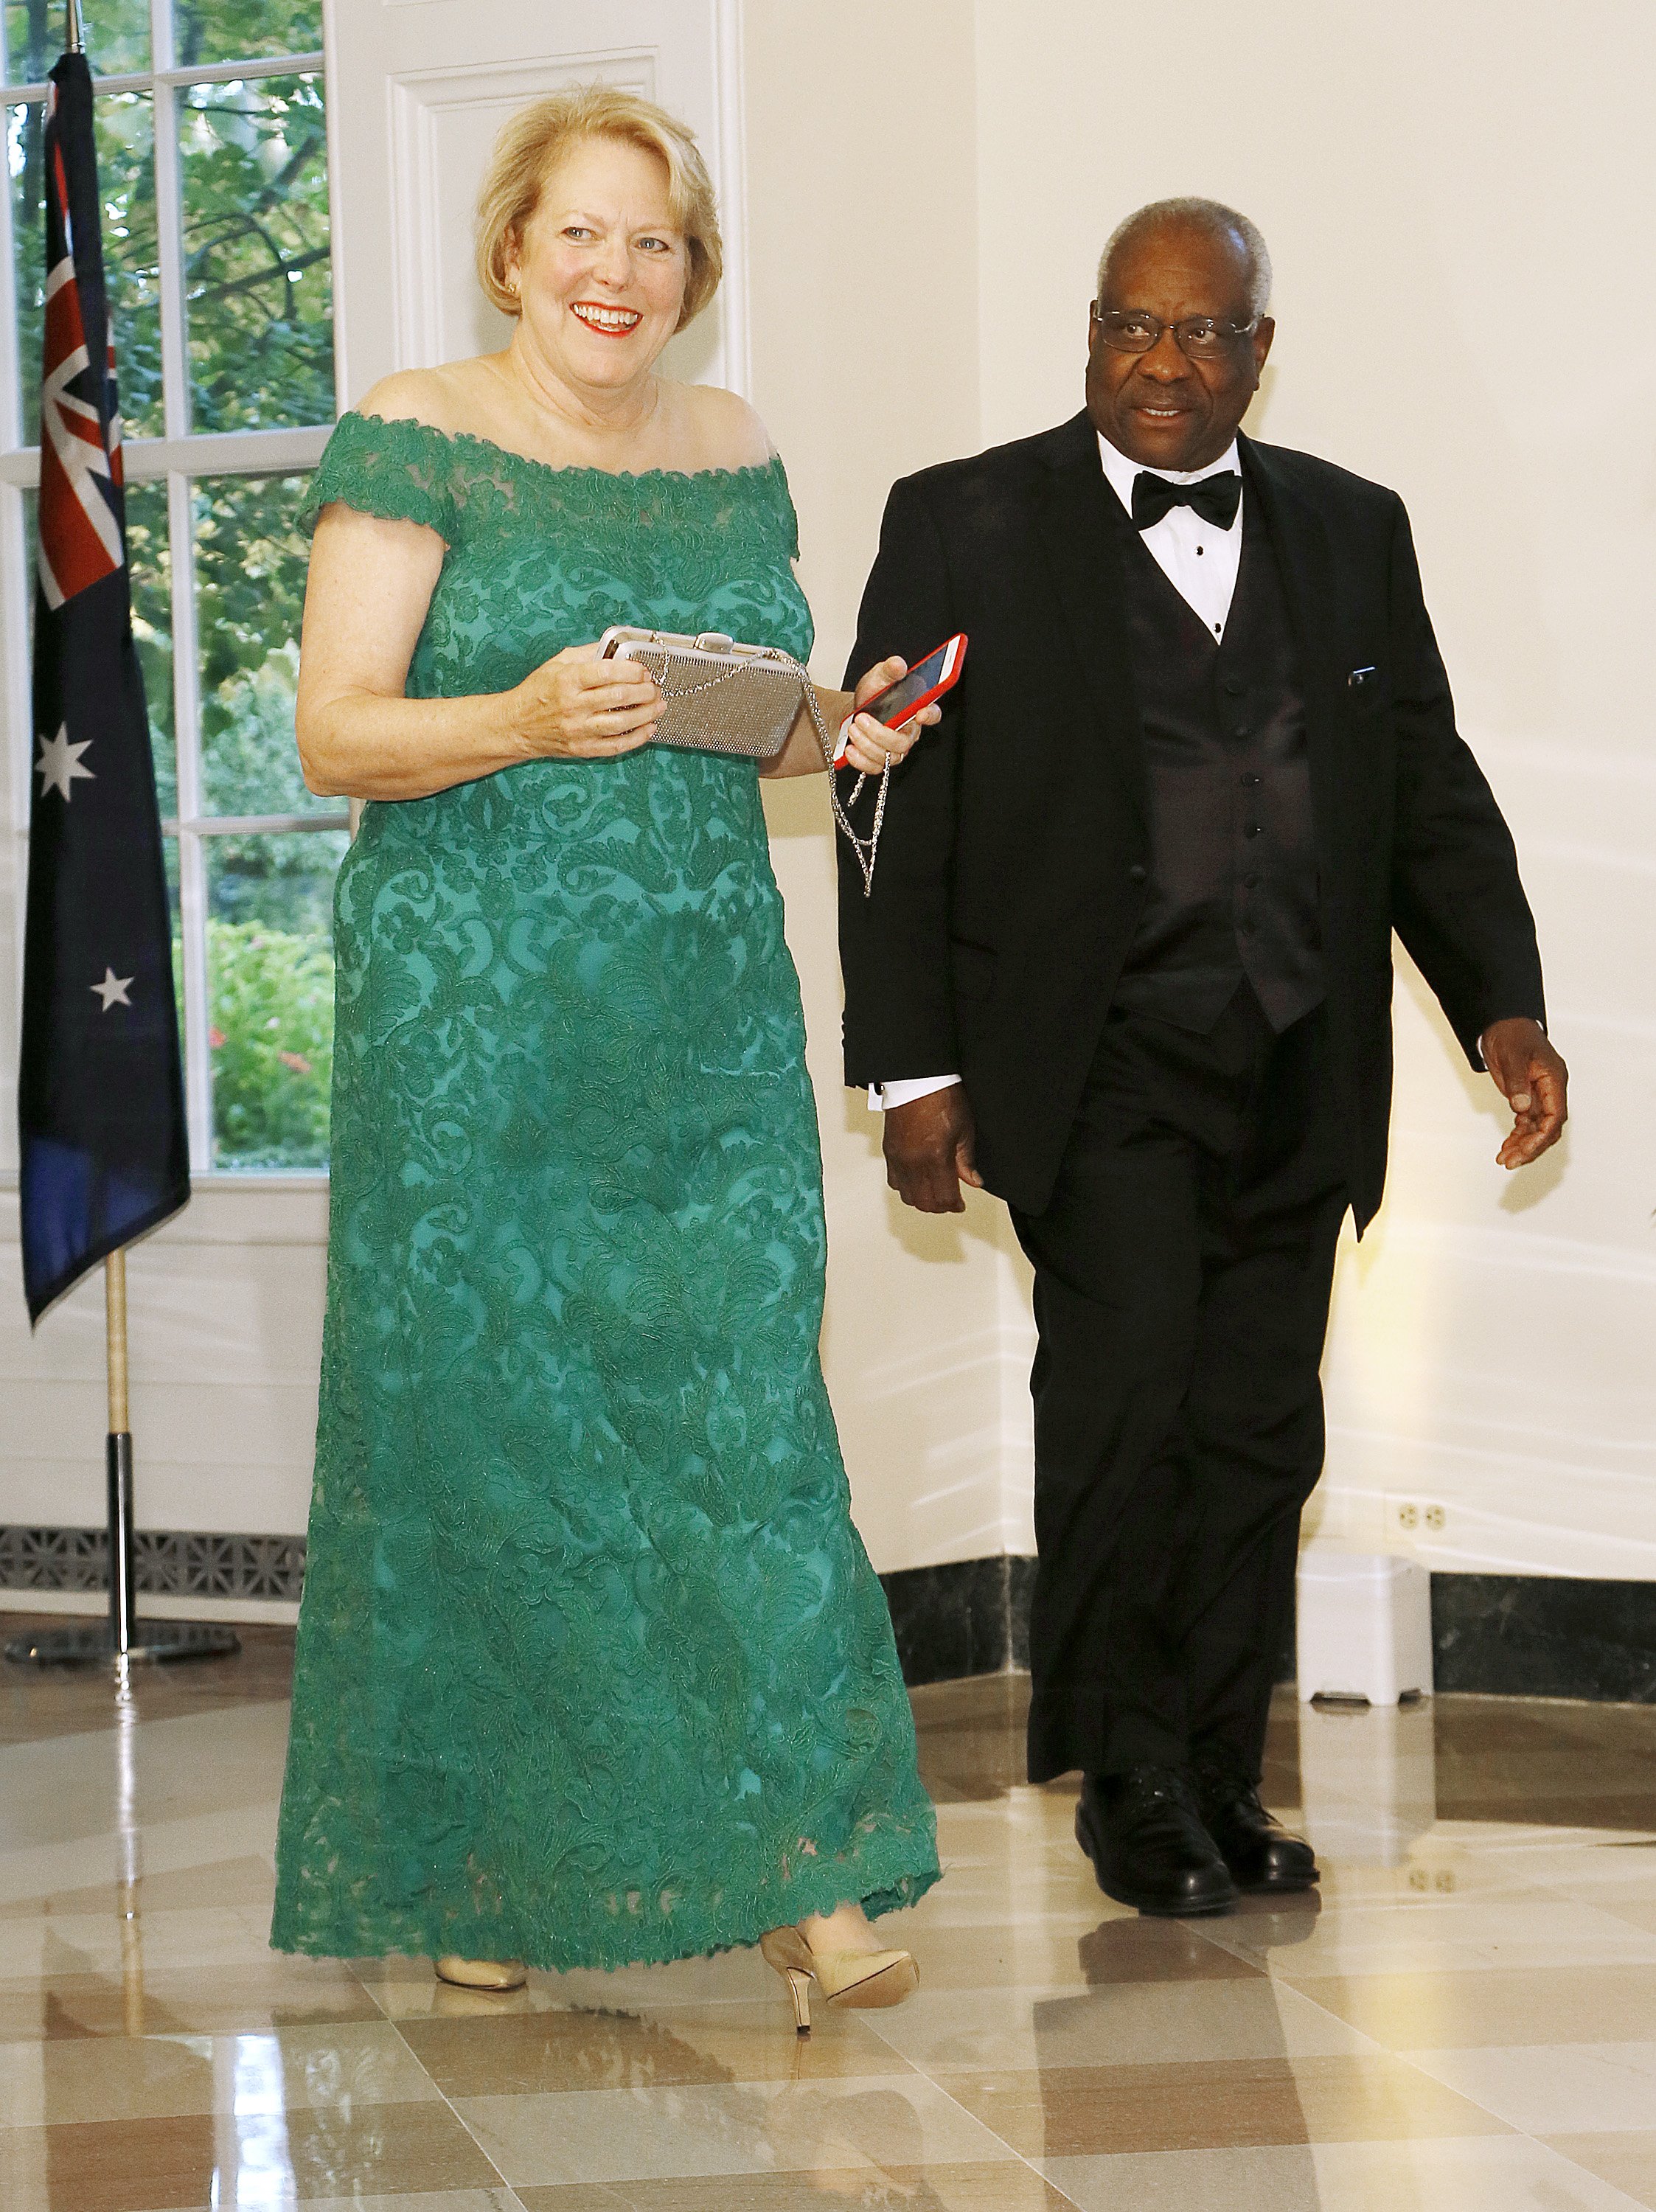 Supreme Court Justice Clarence Thomas and Virginia Thomas arriving for the State Dinner at The White House honoring Australian PM Morrison in Washington, DC | Source: Getty Images